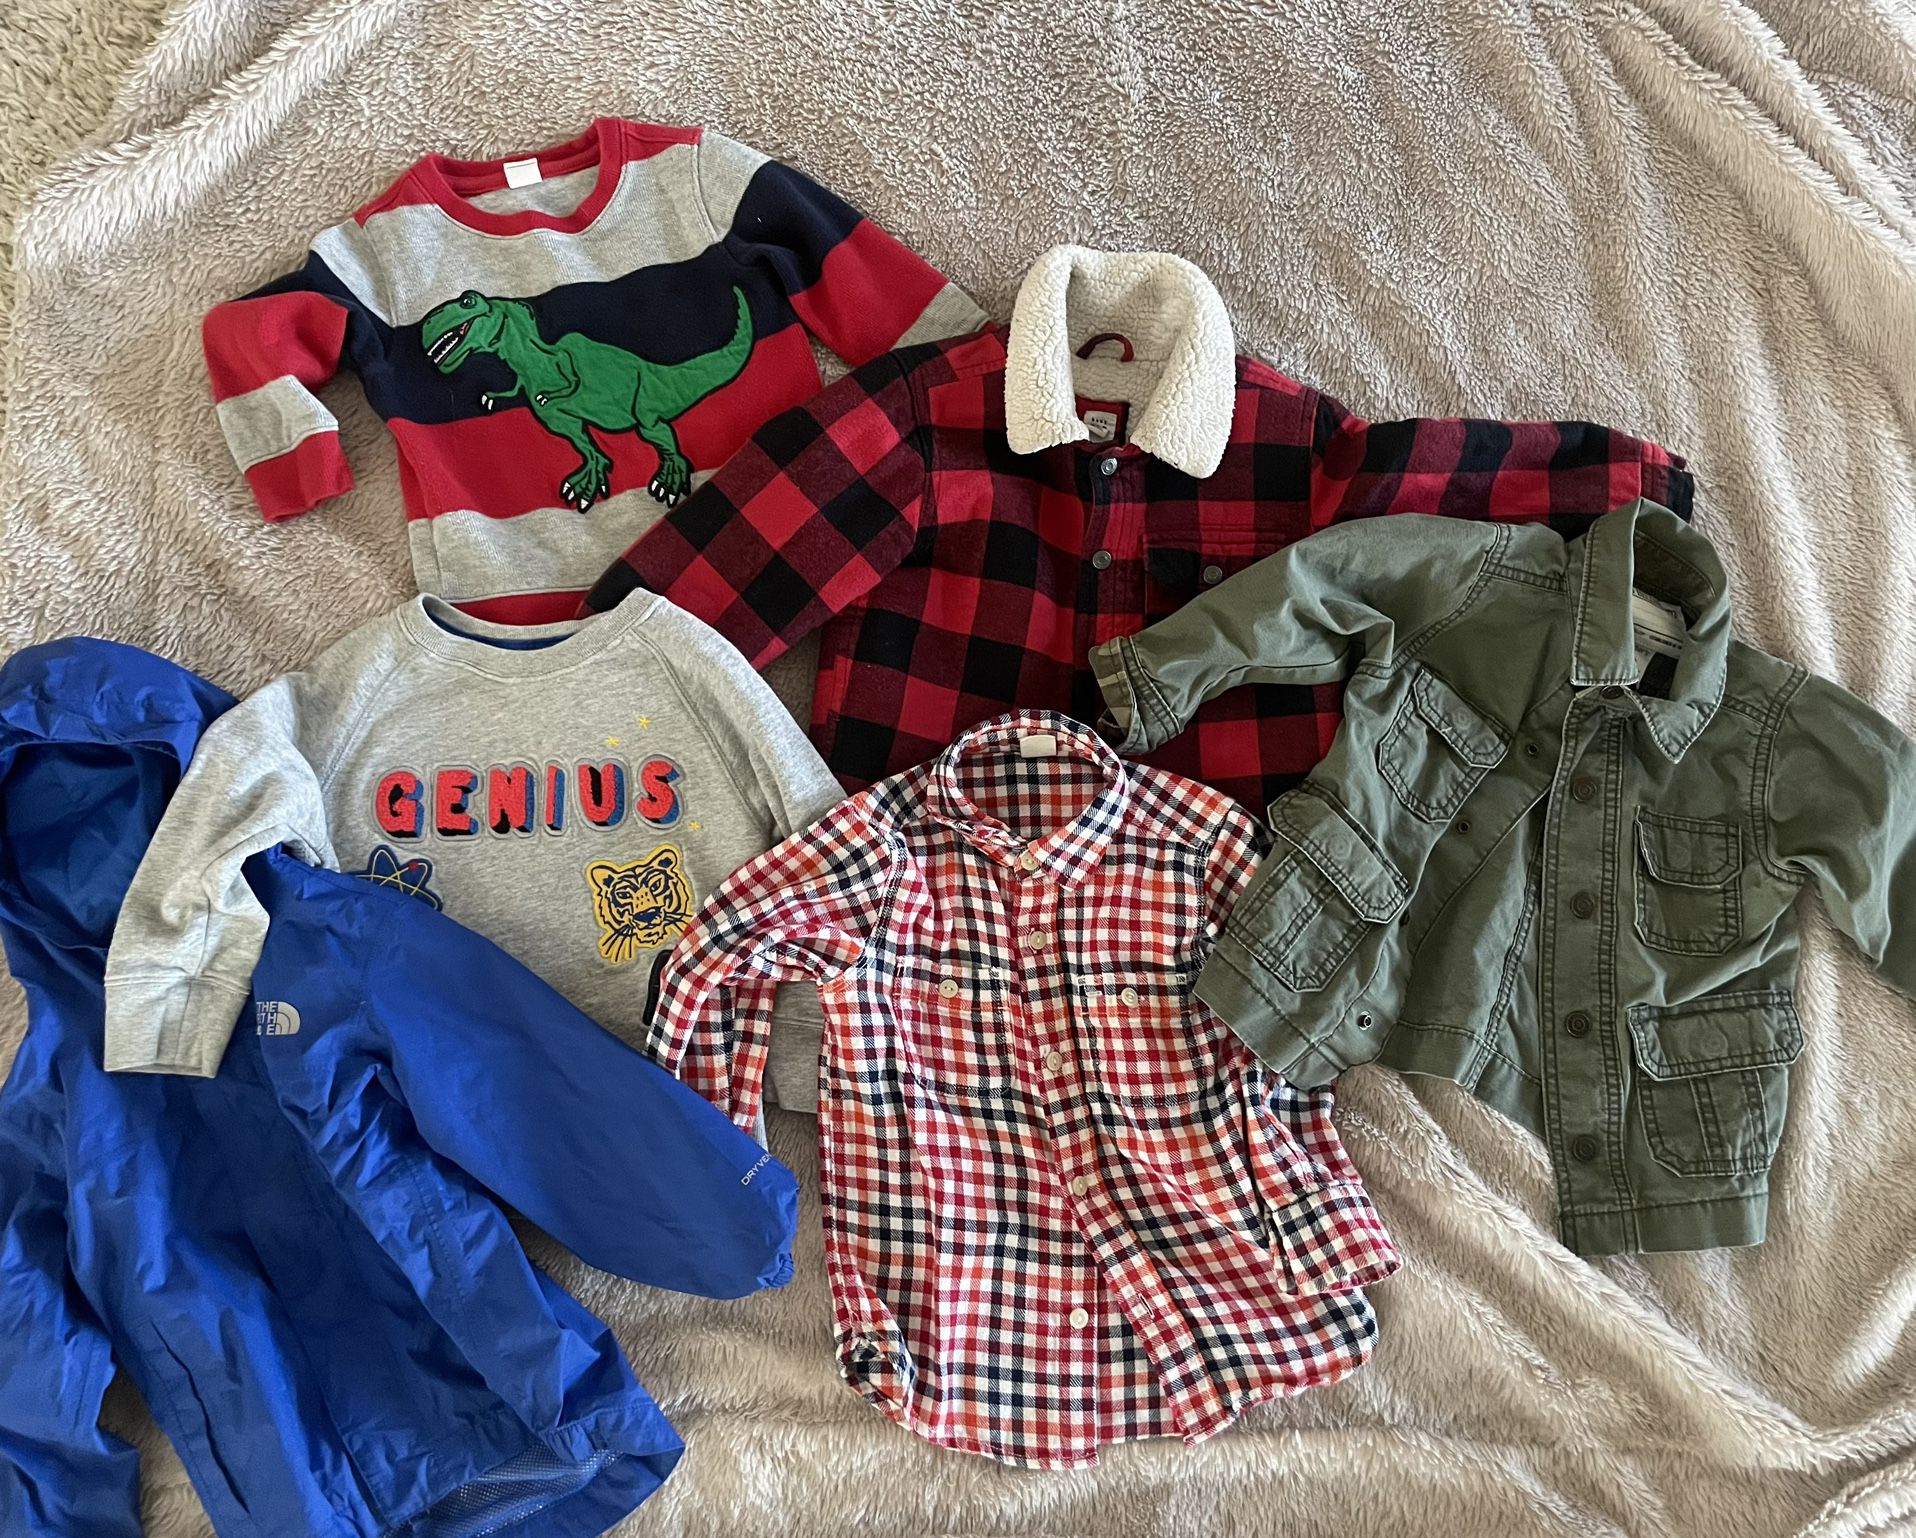 Toddler boy 2T Jackets And Clothes 